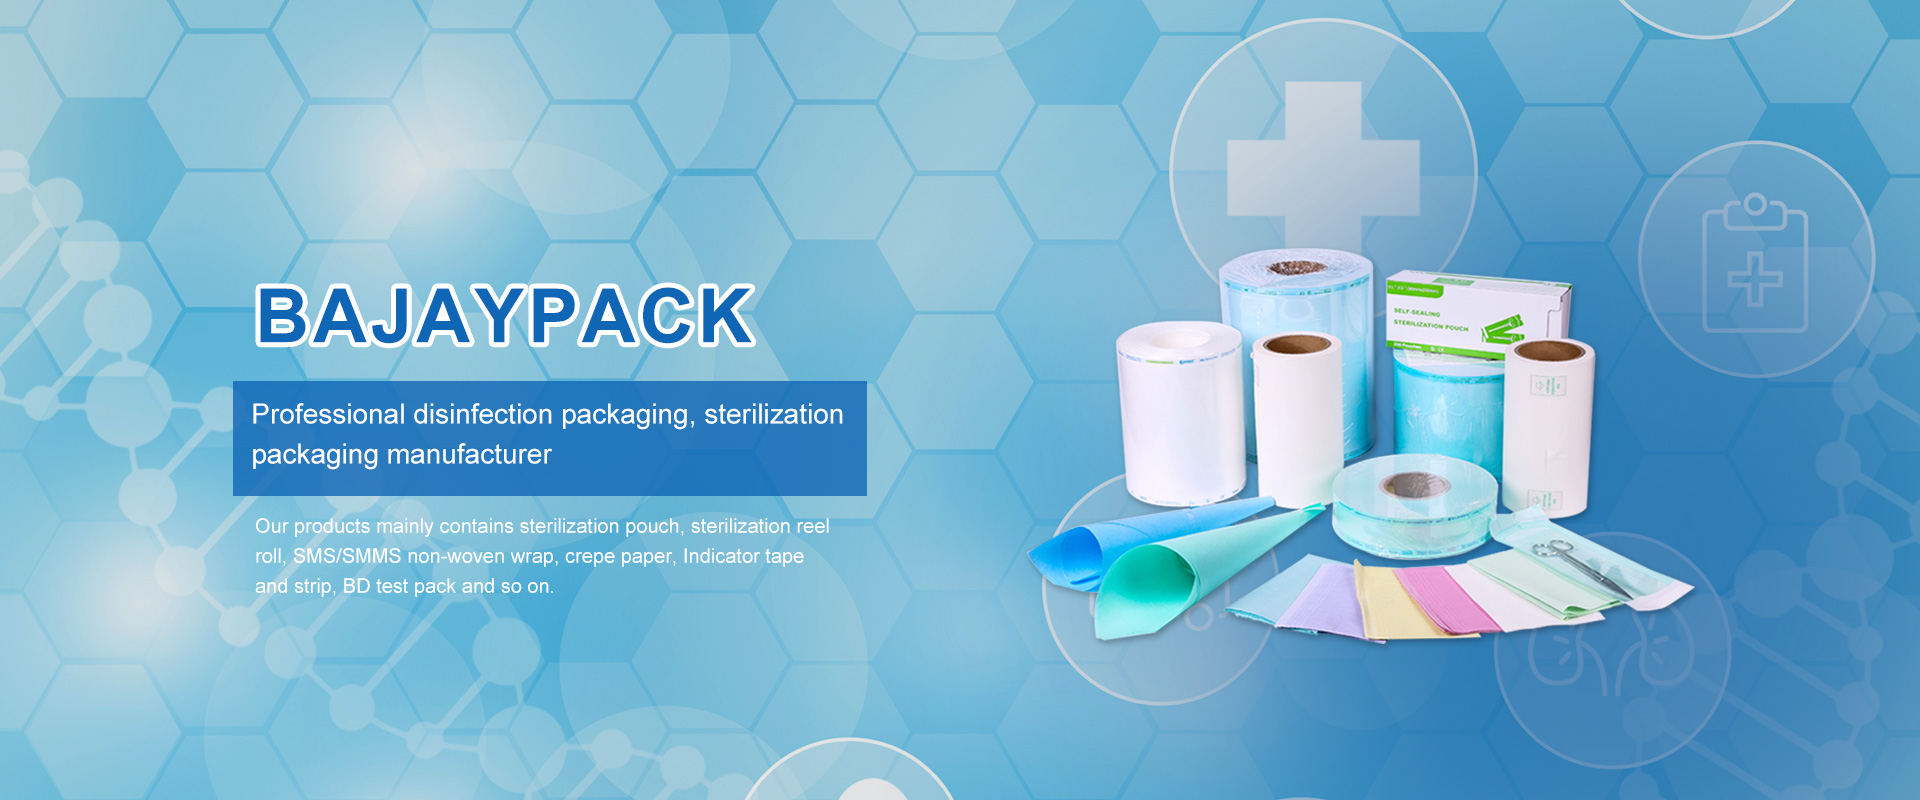 Basic principle of sterilization packaging of medical devices